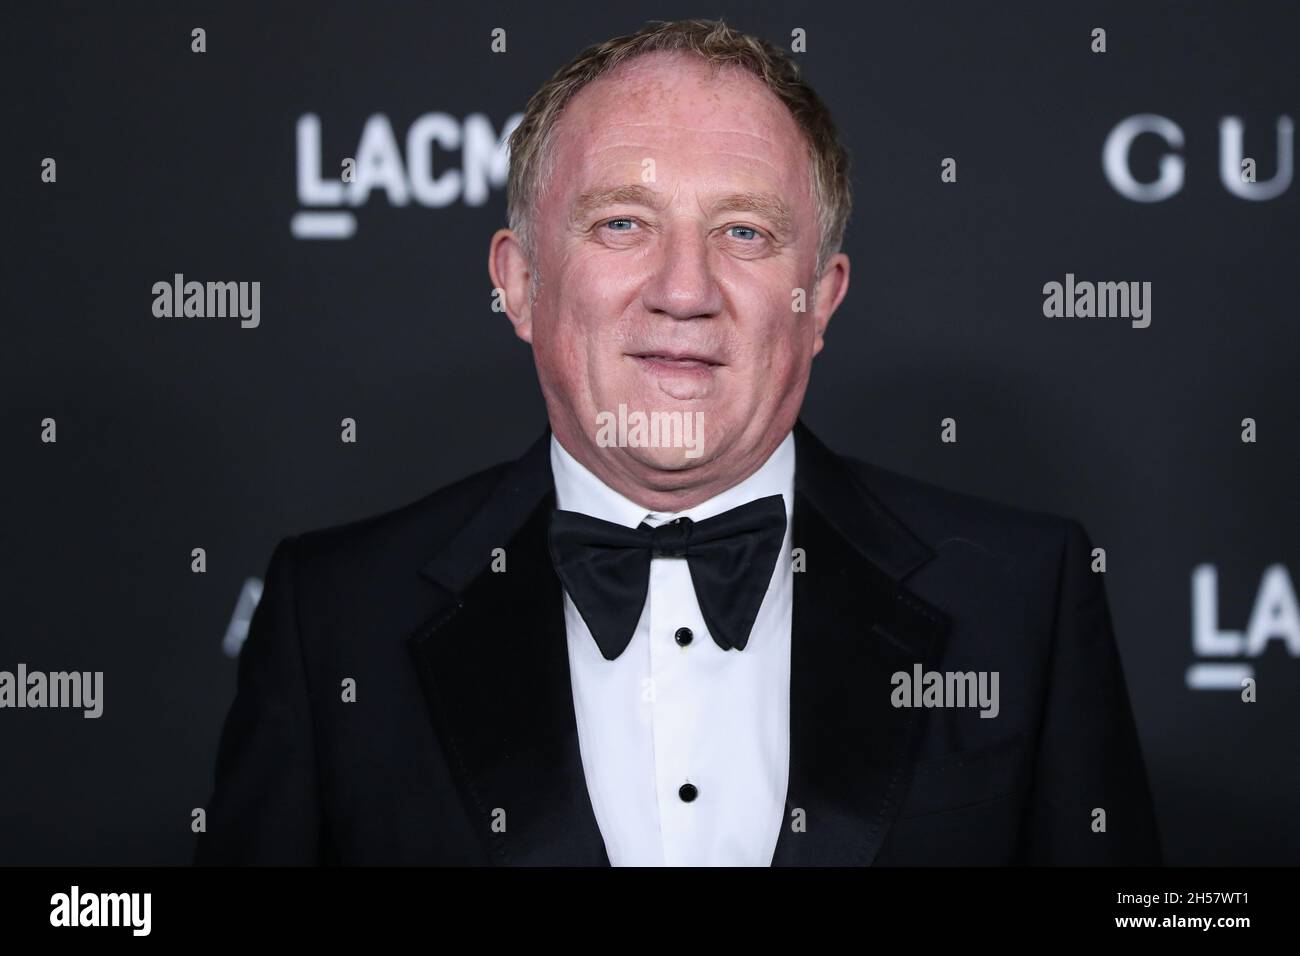 Los Angeles, United States. 06th Nov, 2021. LOS ANGELES, CALIFORNIA, USA - NOVEMBER 06: CEO of Kering Francois-Henri Pinault arrives at the 10th Annual LACMA Art   Film Gala 2021 held at the Los Angeles County Museum of Art on November 6, 2021 in Los Angeles, California, United States. (Photo by Xavier Collin/Image Press Agency/Sipa USA) Credit: Sipa USA/Alamy Live News Stock Photo